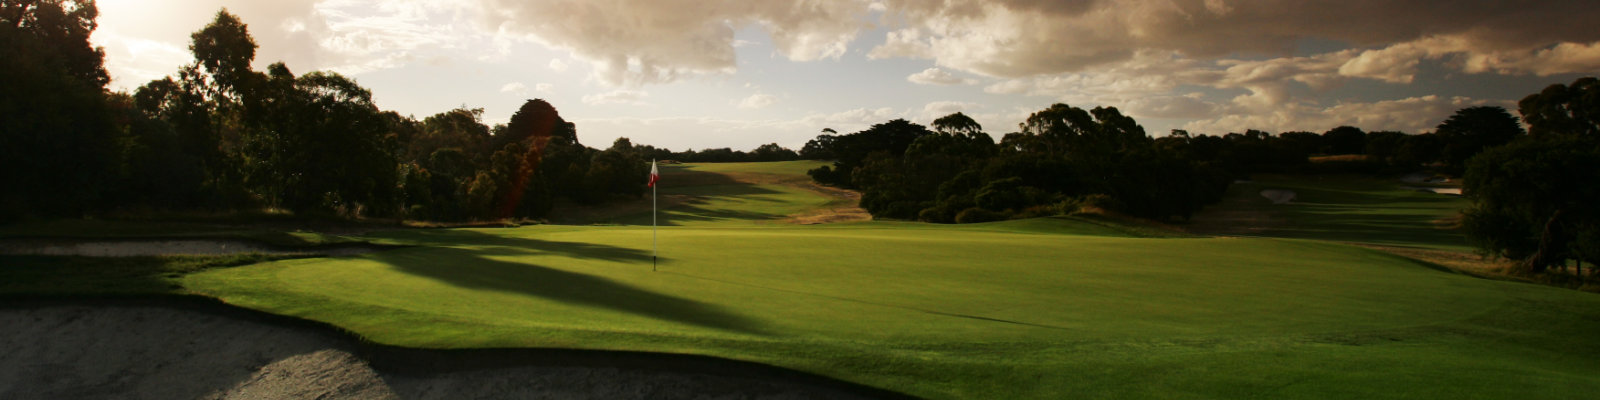 The Royal Melbourne Golf Club (photo by David Cannon / GettyImages)